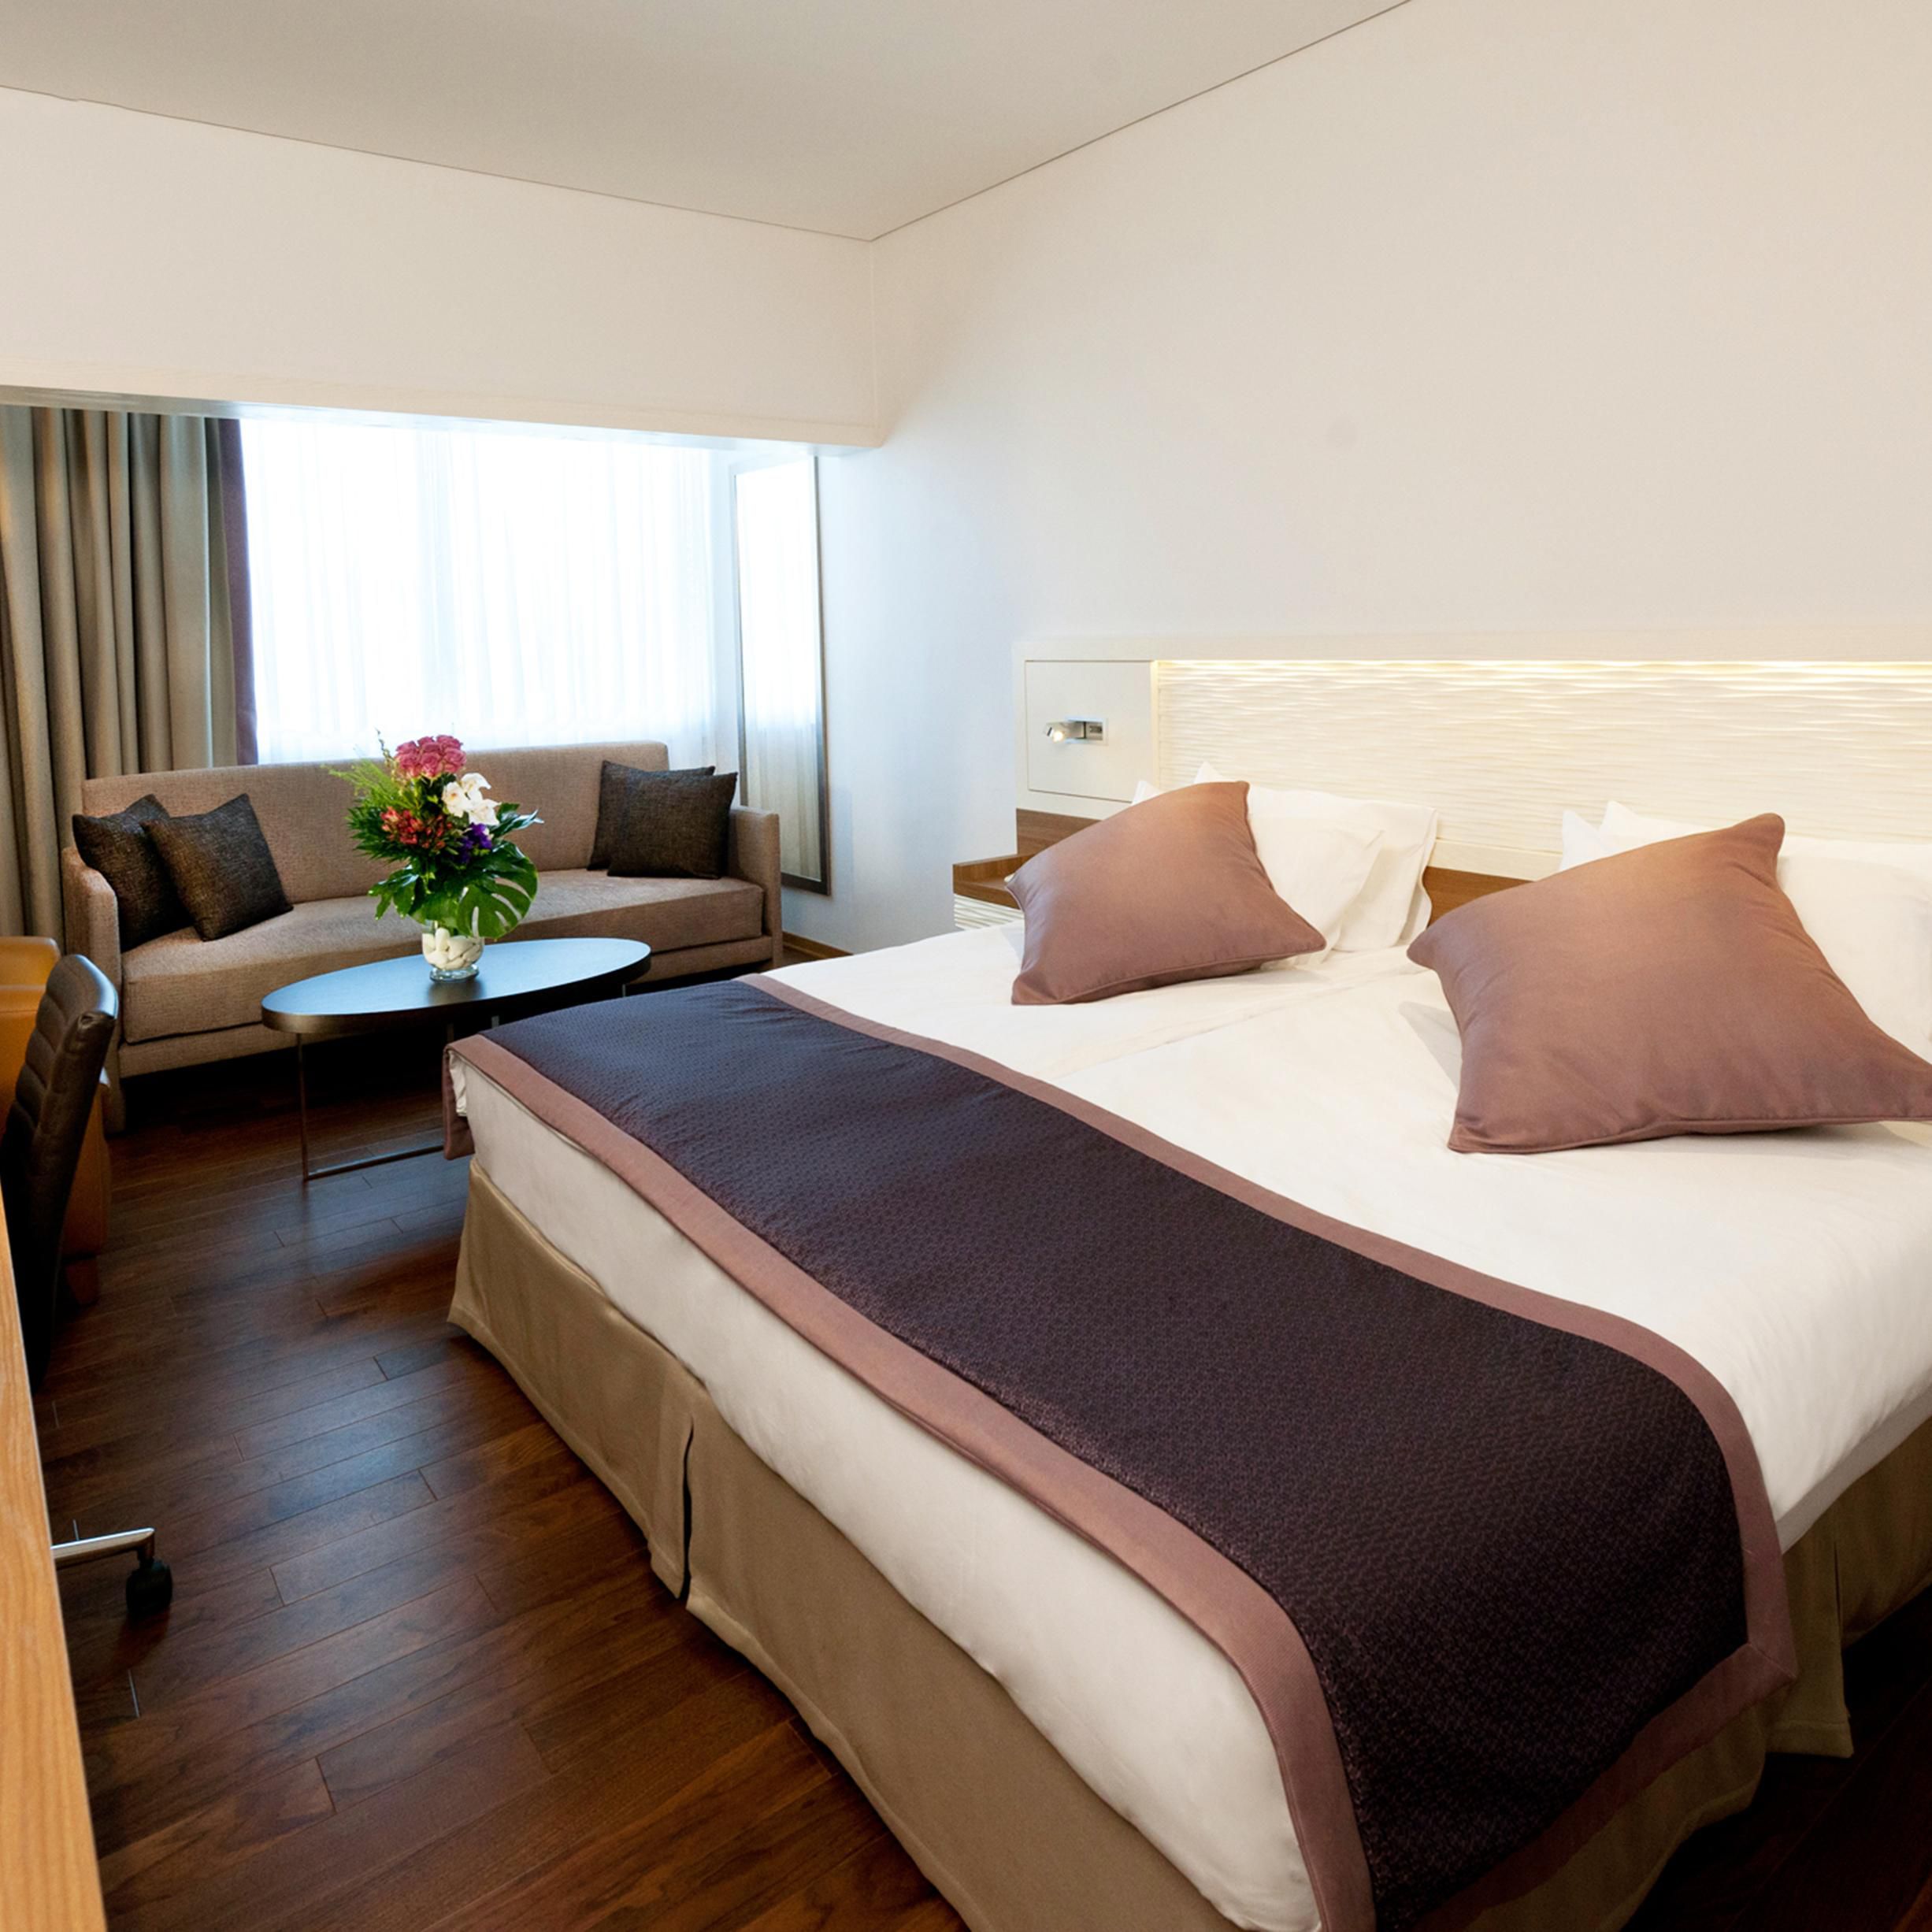 Enjoy a spacious King City View room during your stay!